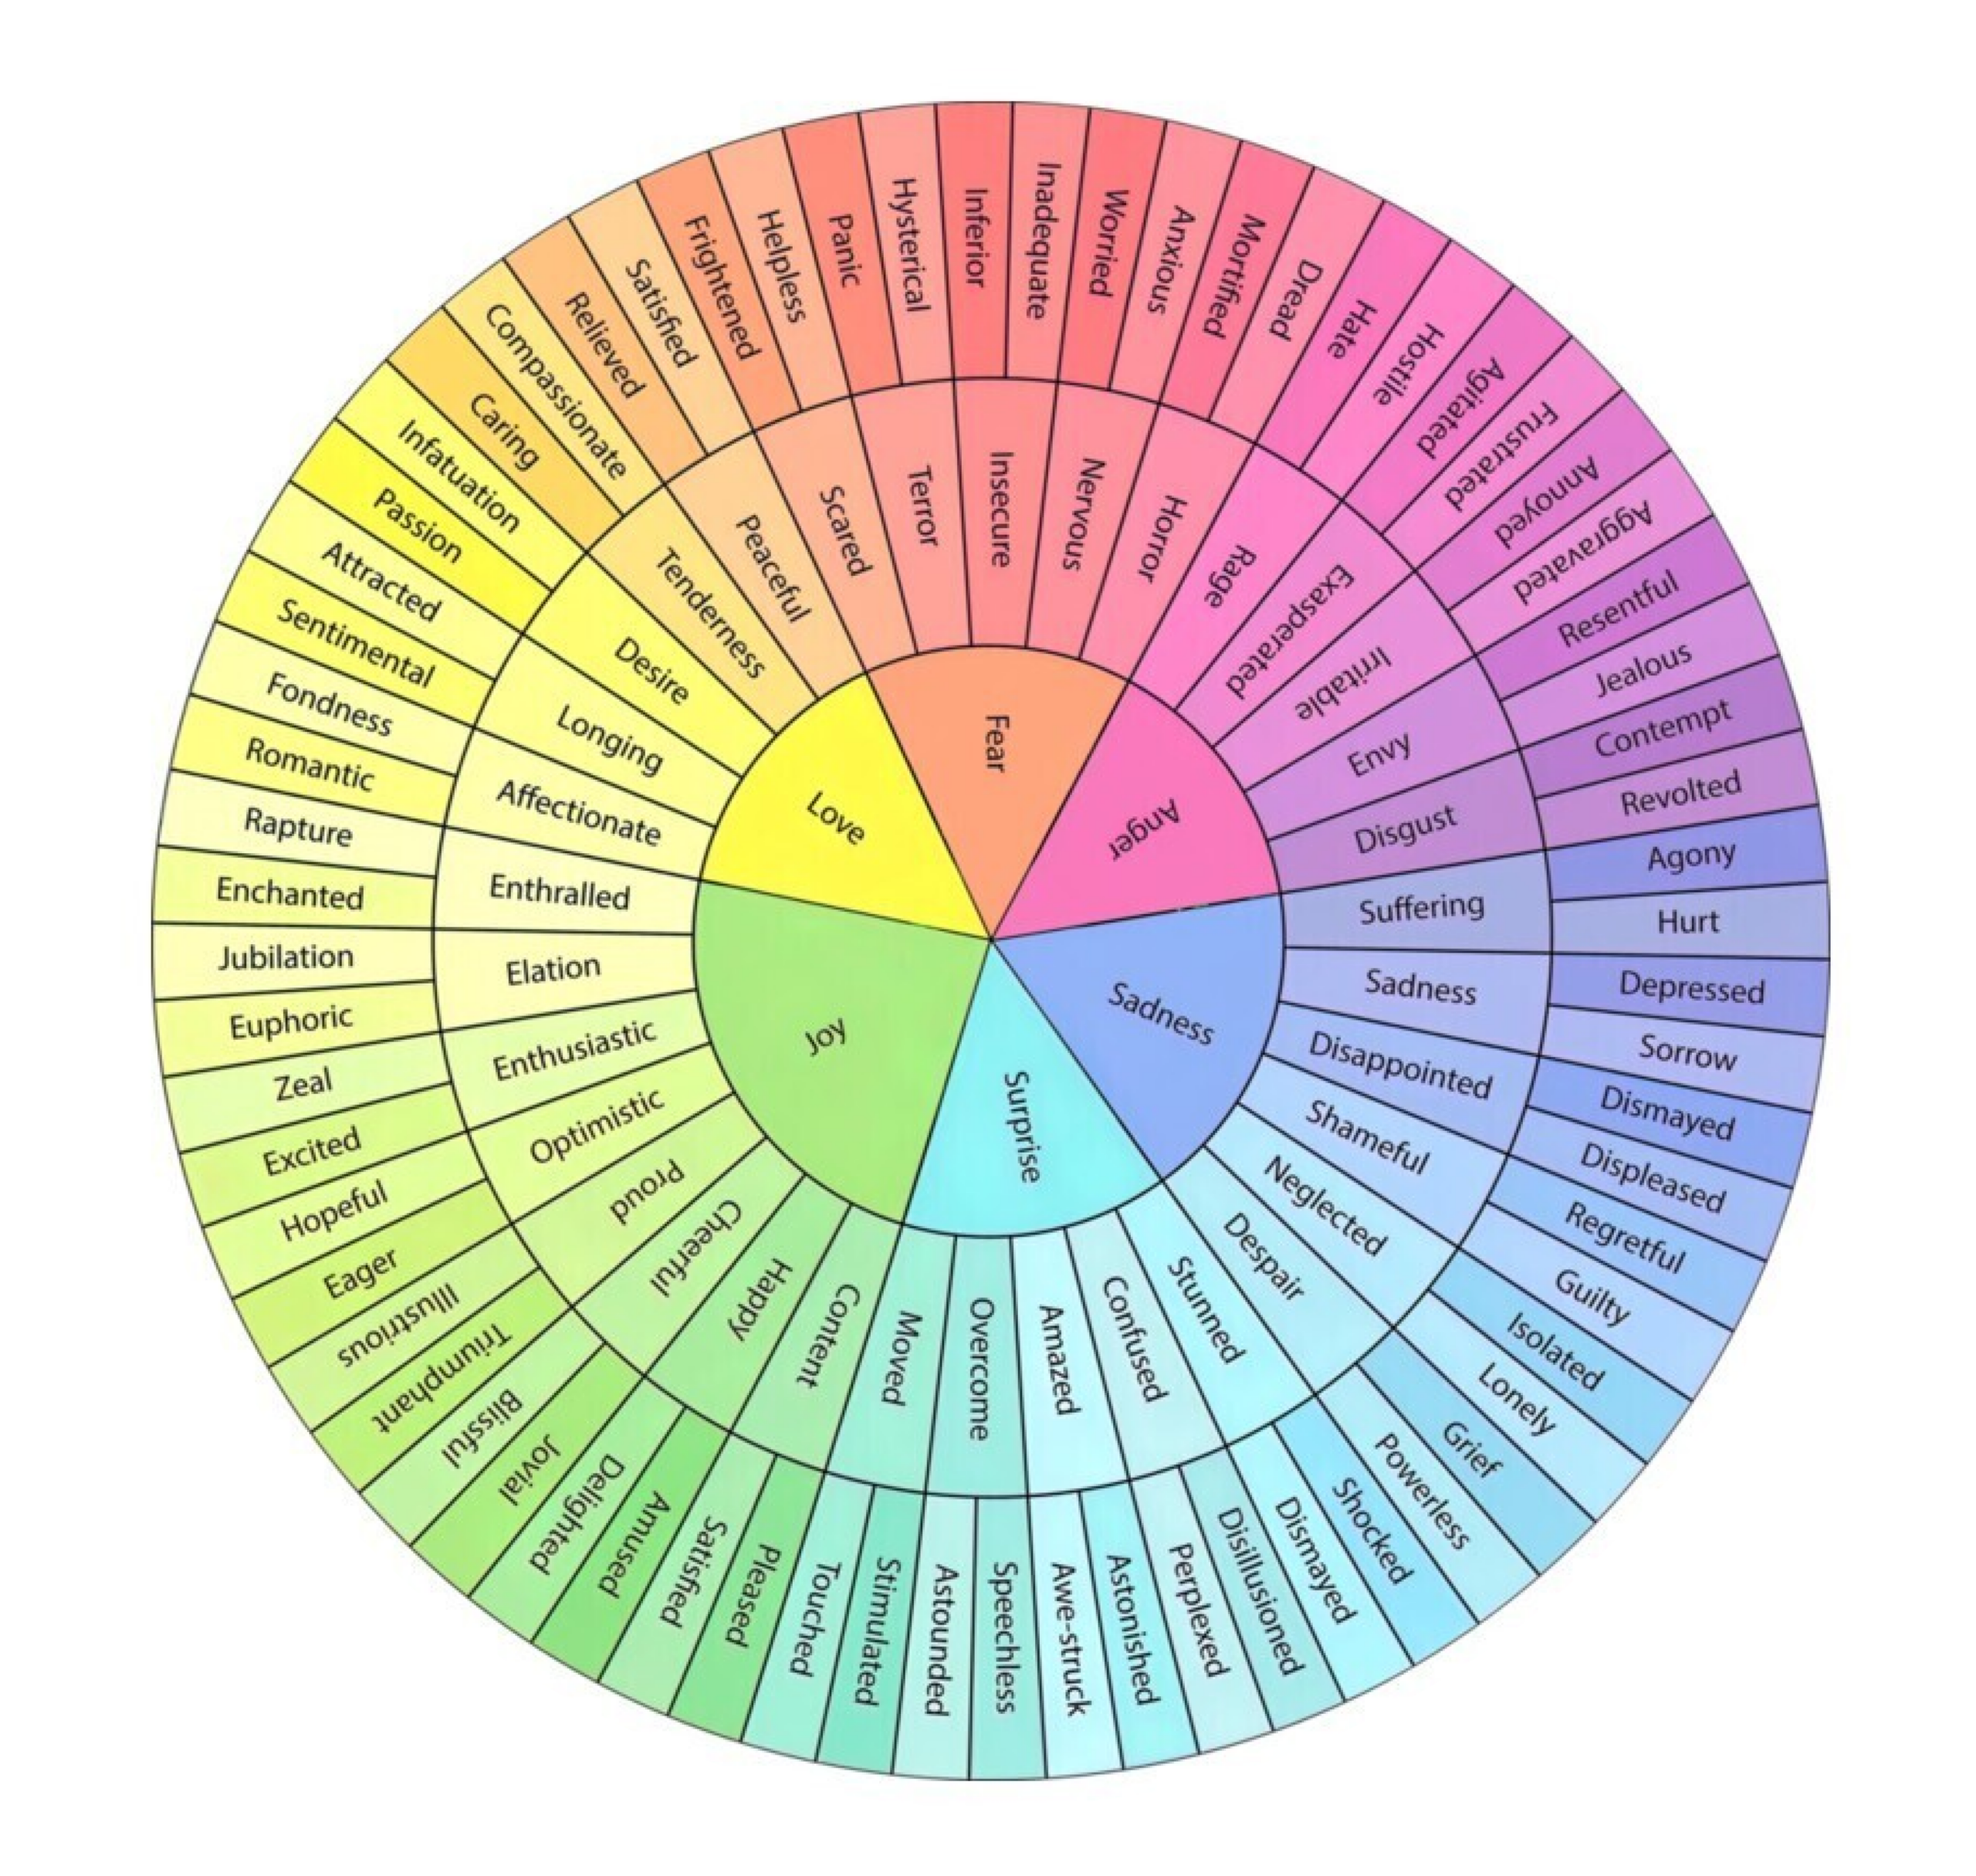 Emotion Wheel with all of the different emotions